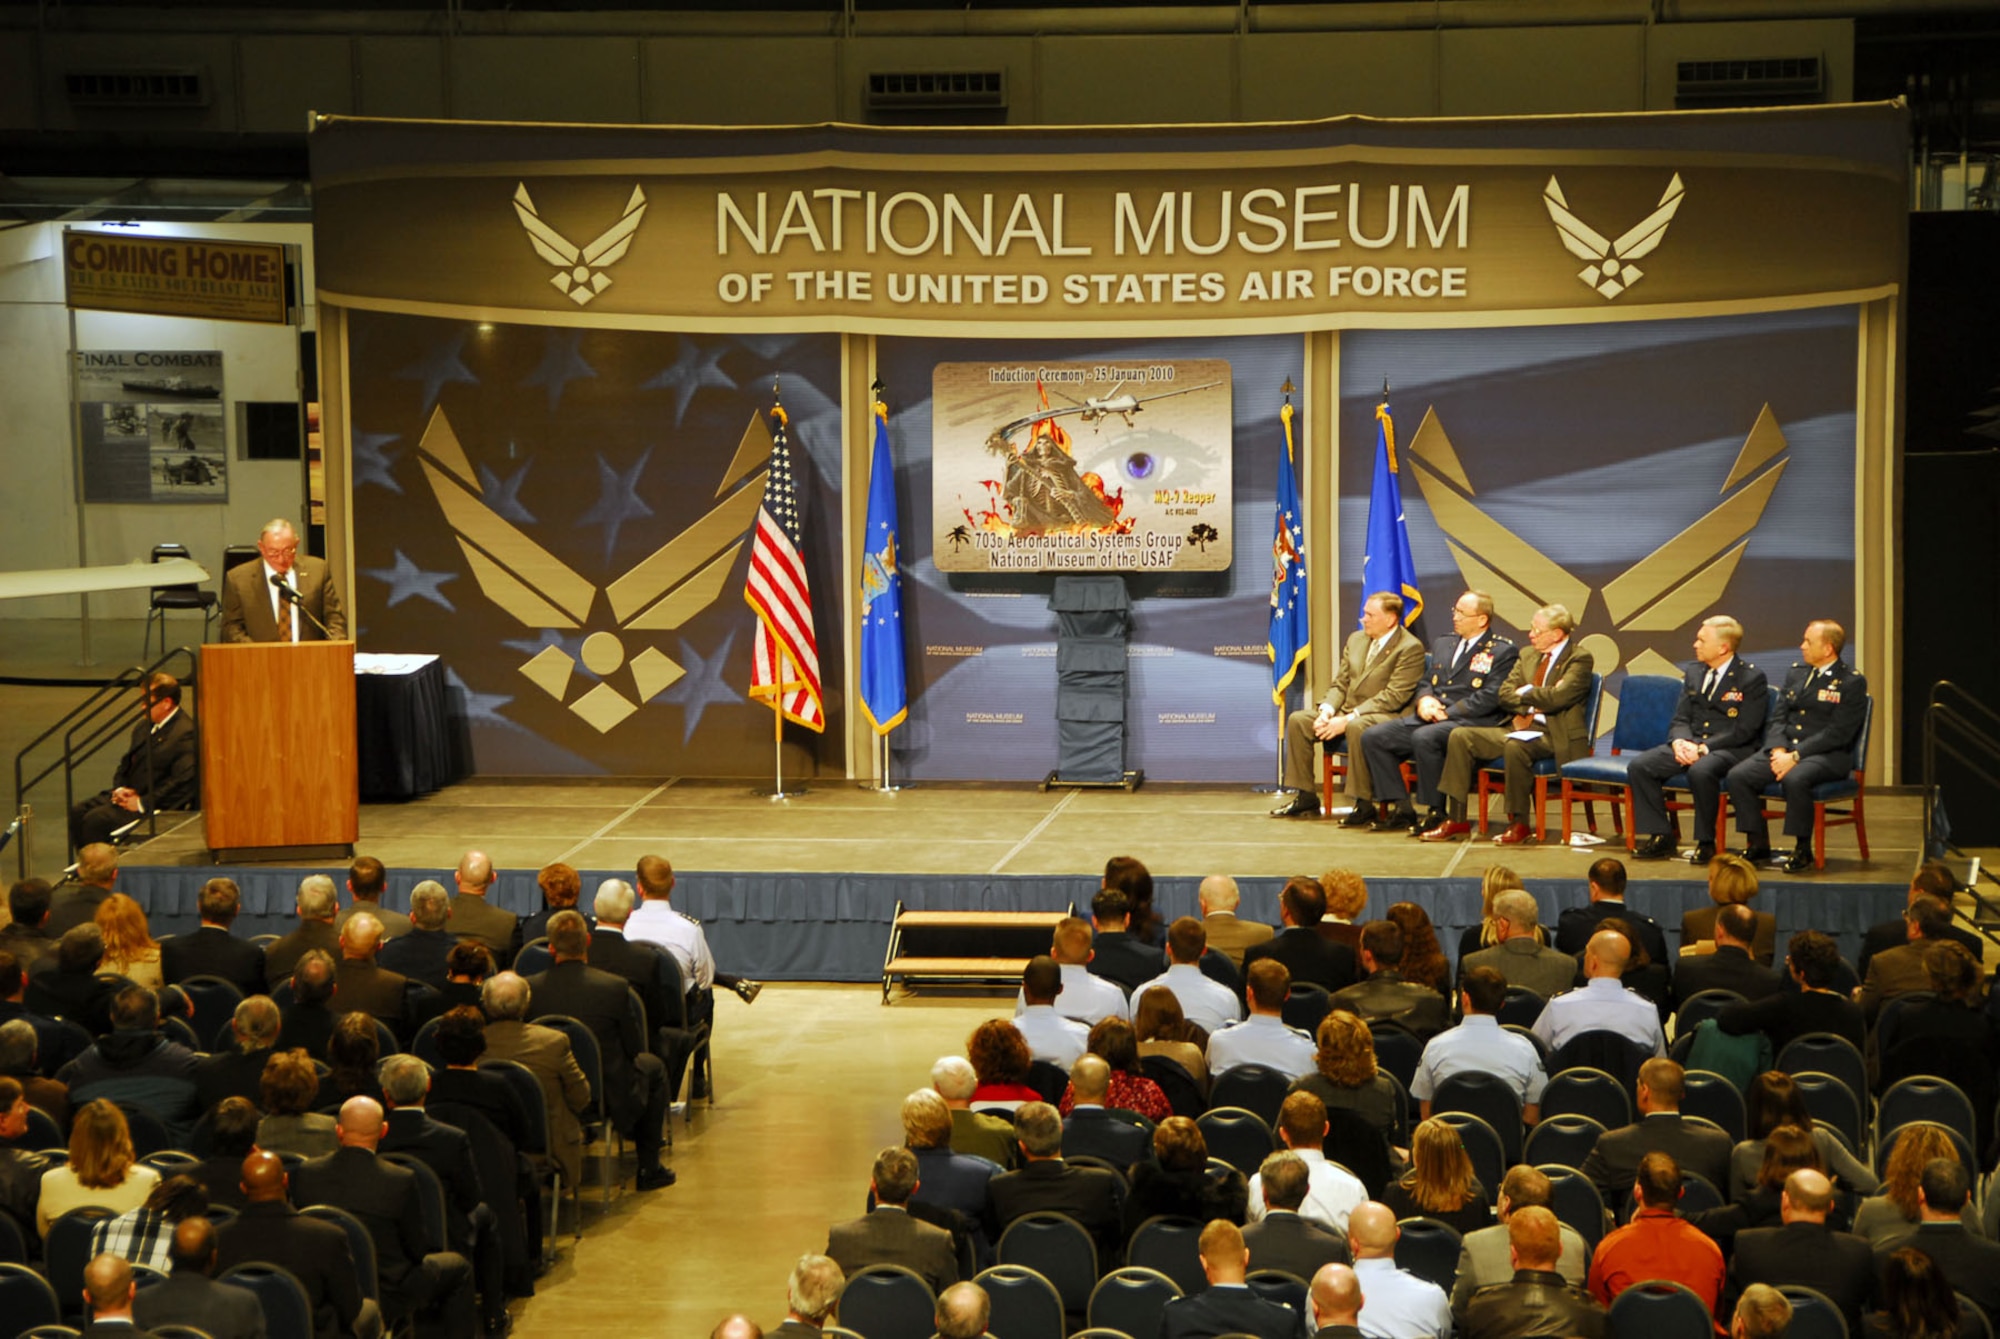 DAYTON, Ohio -- Thomas J. Cassidy Jr., president of General Atomics Aeronautical Systems, Inc. Aircraft Systems Group, addresses the audience during the MQ-9 Reaper exhibit opening at the National Museum of the U.S. Air Force on Jan. 25, 2010. (U.S. Air Force photo)